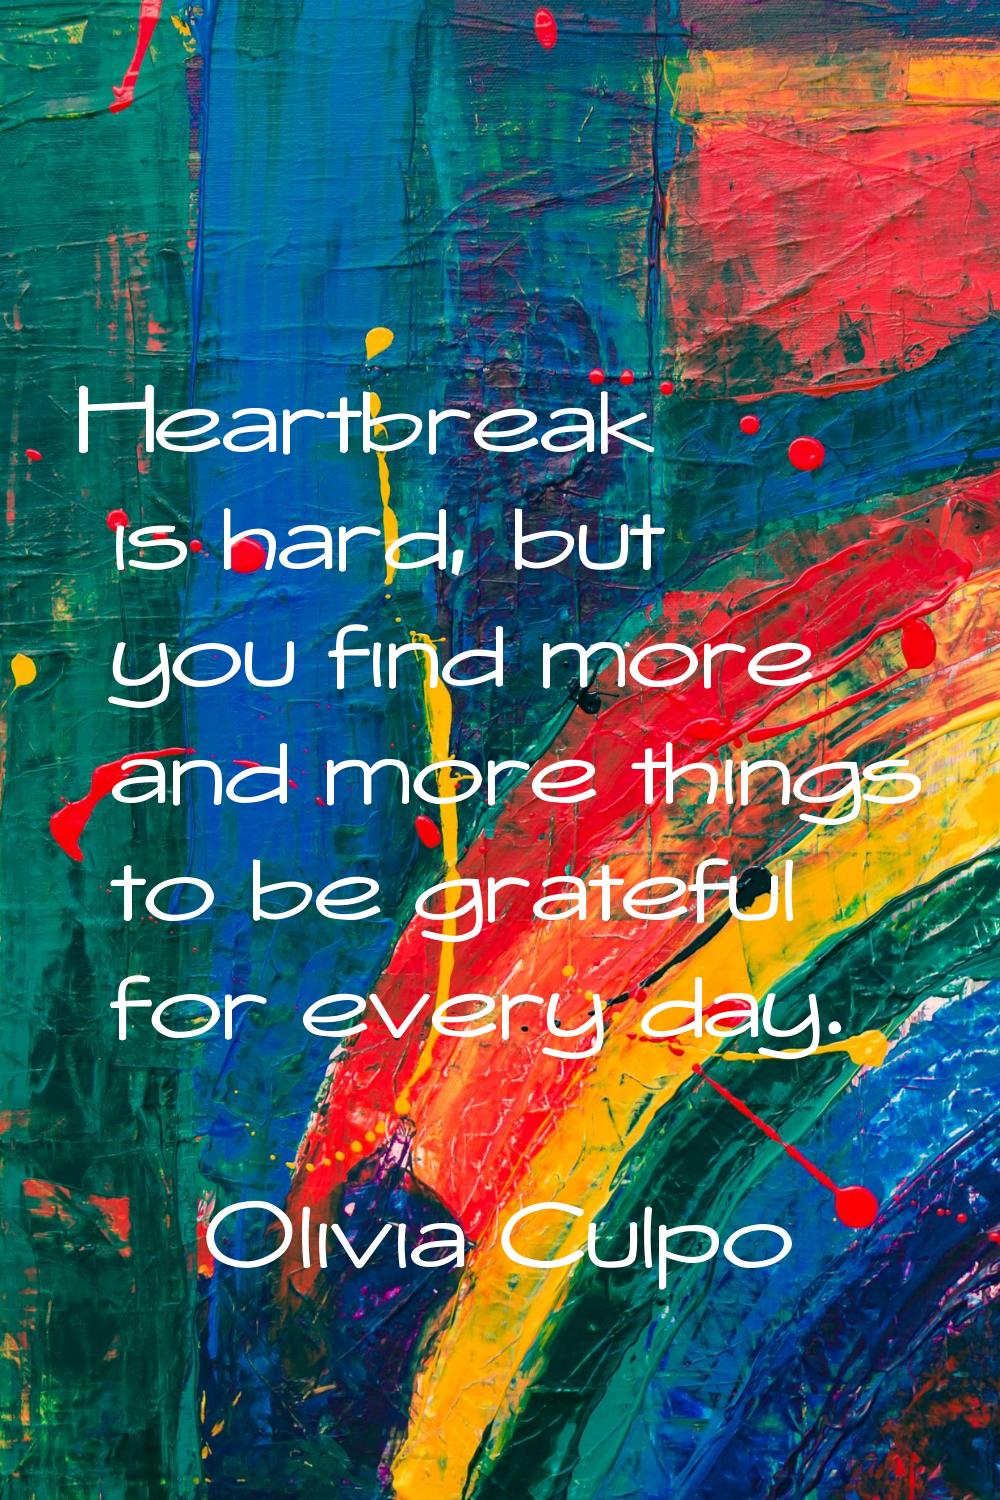 Heartbreak is hard, but you find more and more things to be grateful for every day.